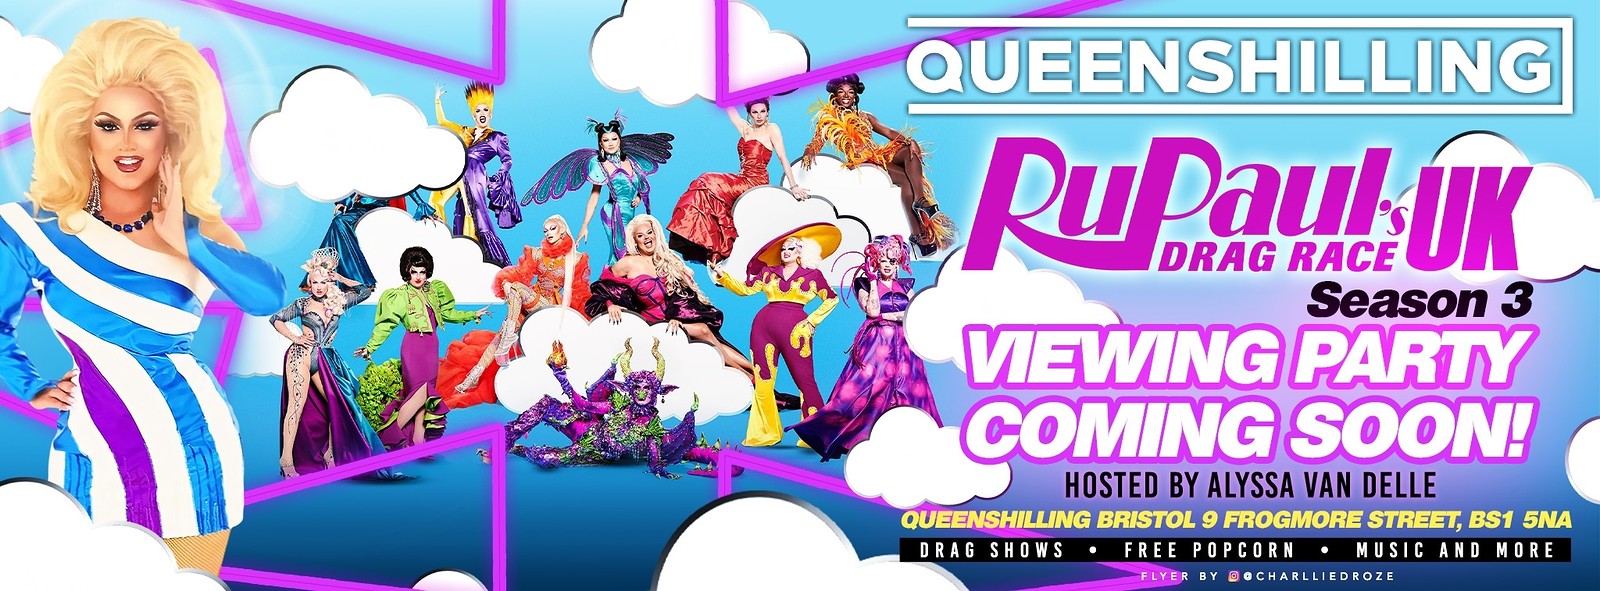 Rupauls drag race UK viewing party Episode 2 at Queenshilling